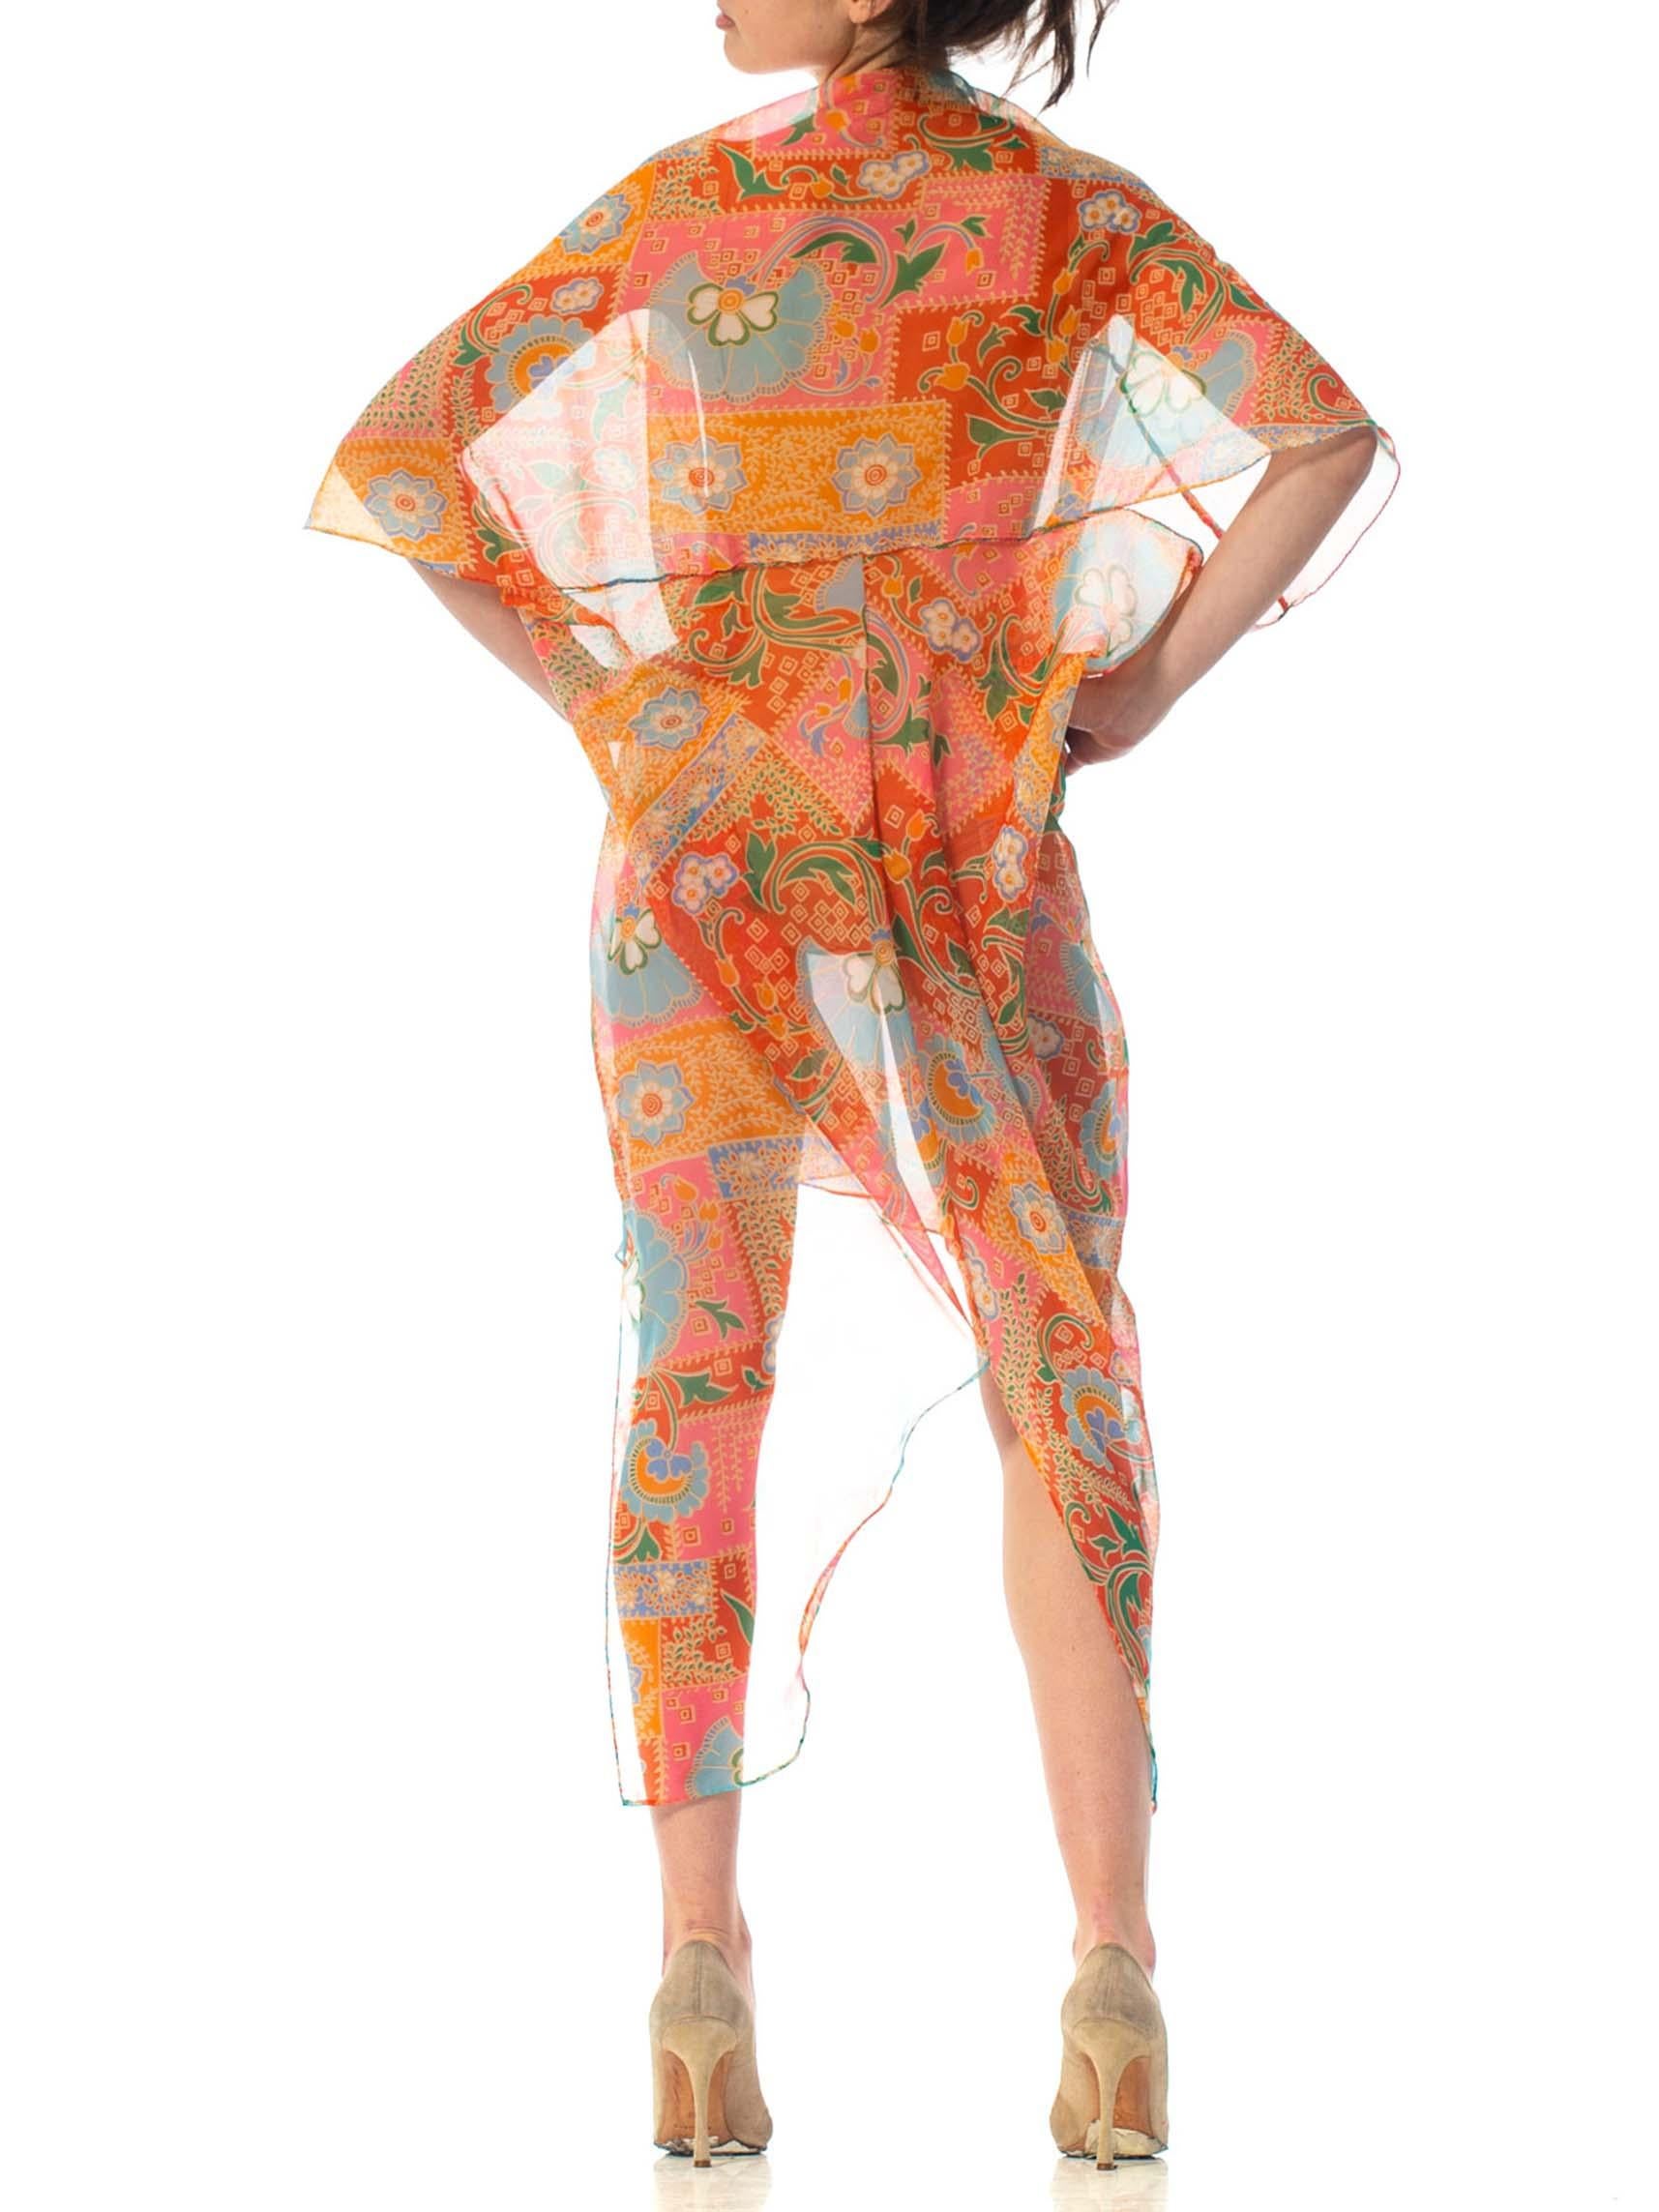 MORPHEW COLLECTION Psychedelic Polyester Organza Beach Cover-Up Cocoon 5